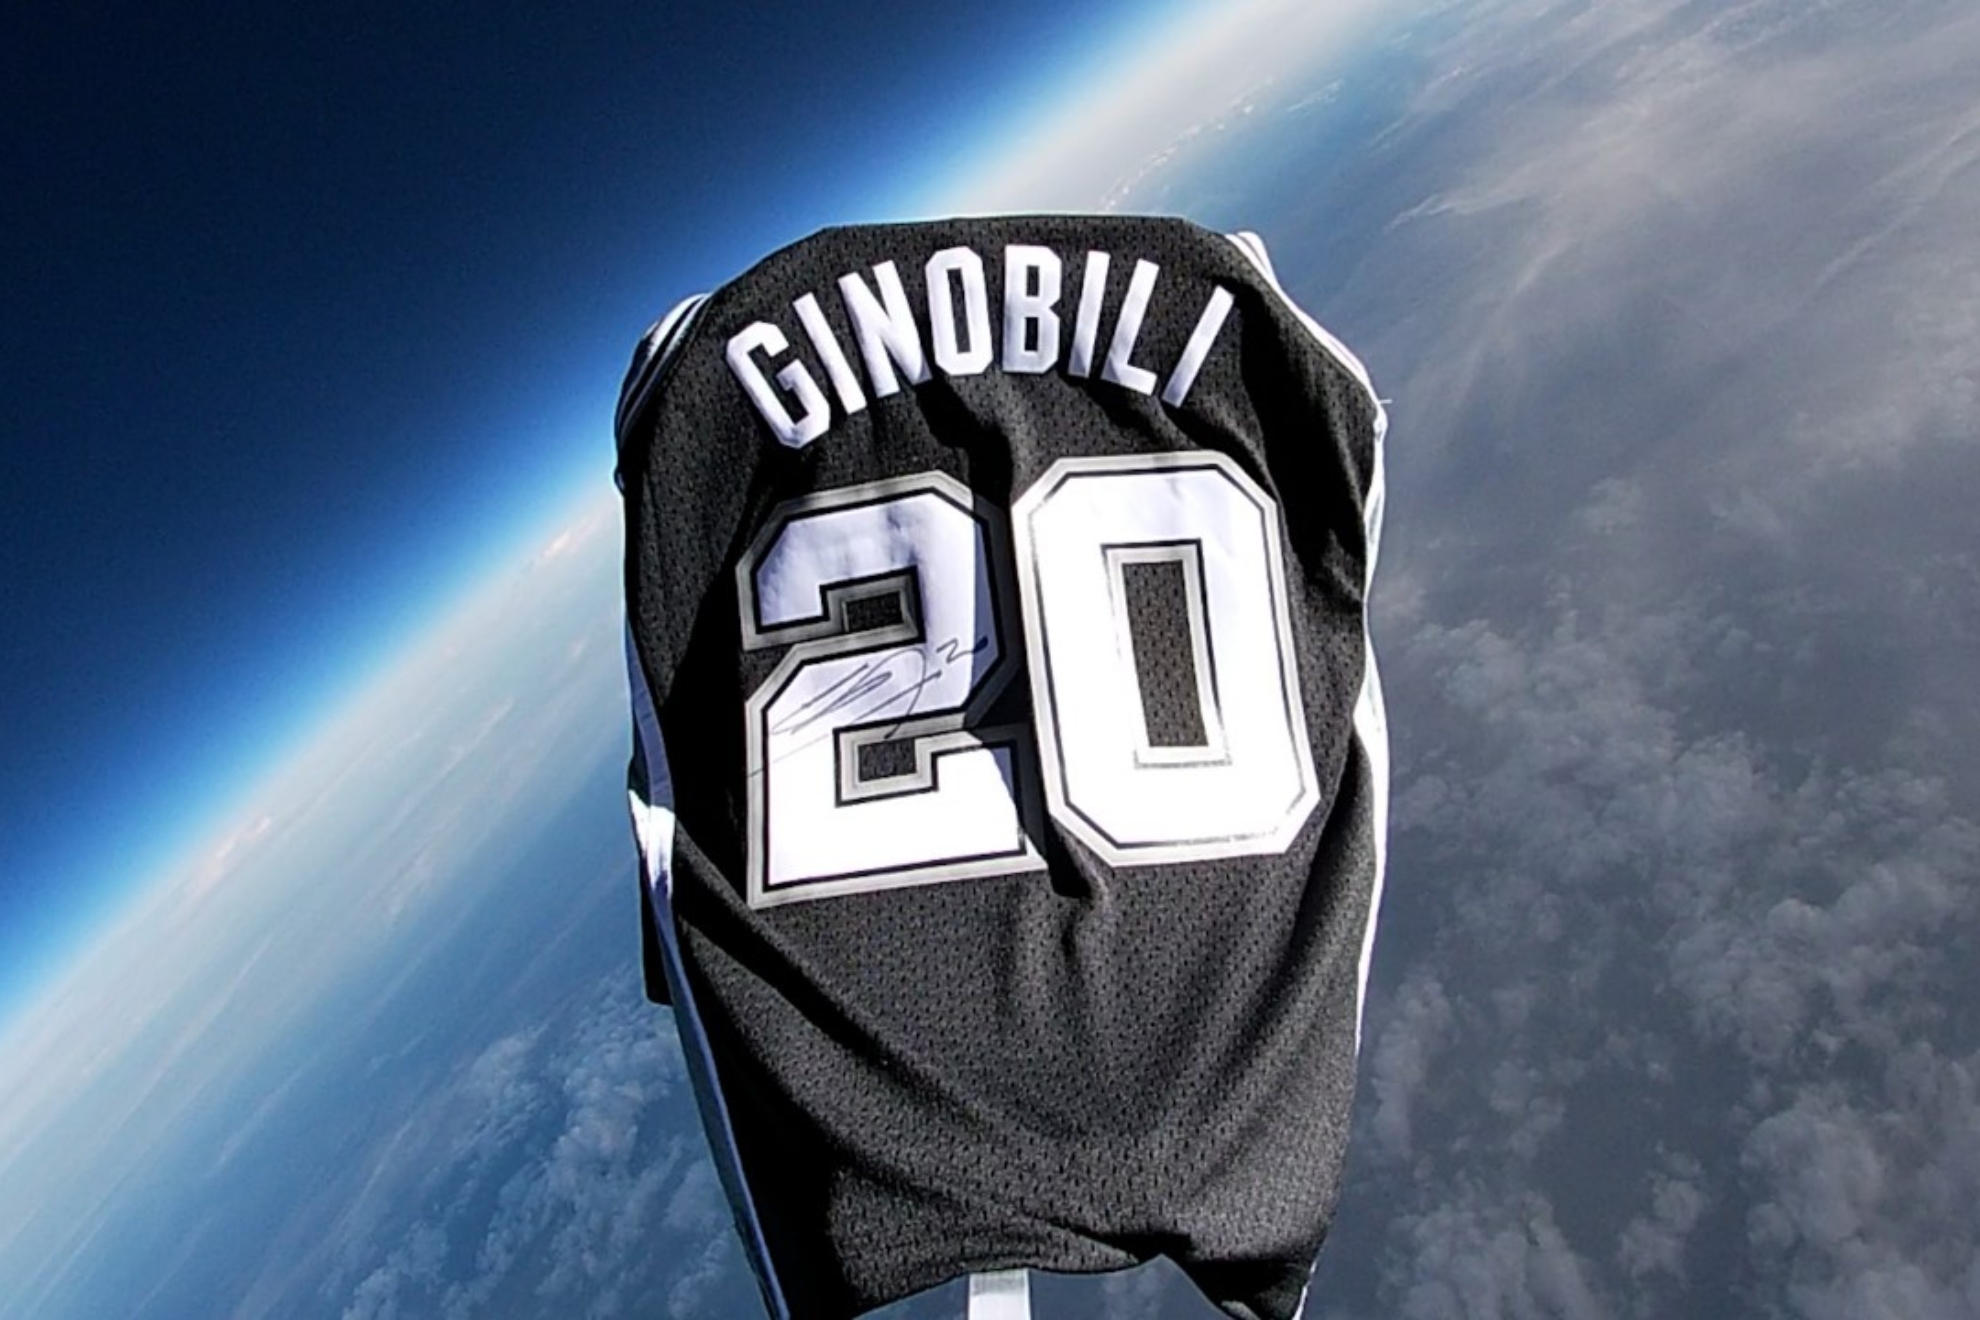 The best tribute to a legend: Ginobili's jersey sent to space!